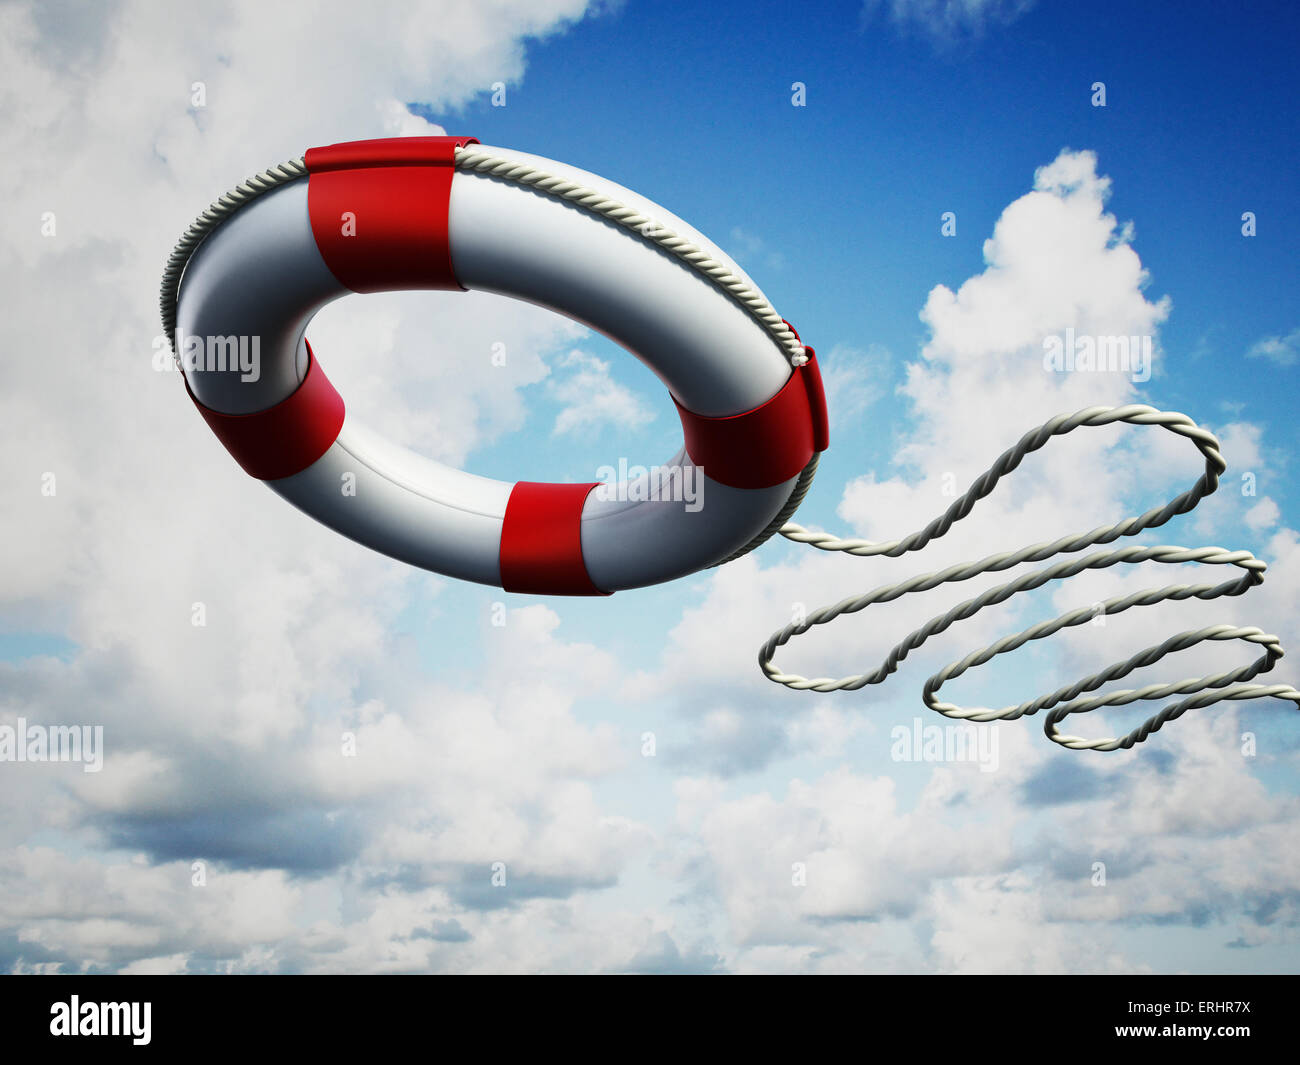 Life belt in the air help concept. Stock Photo